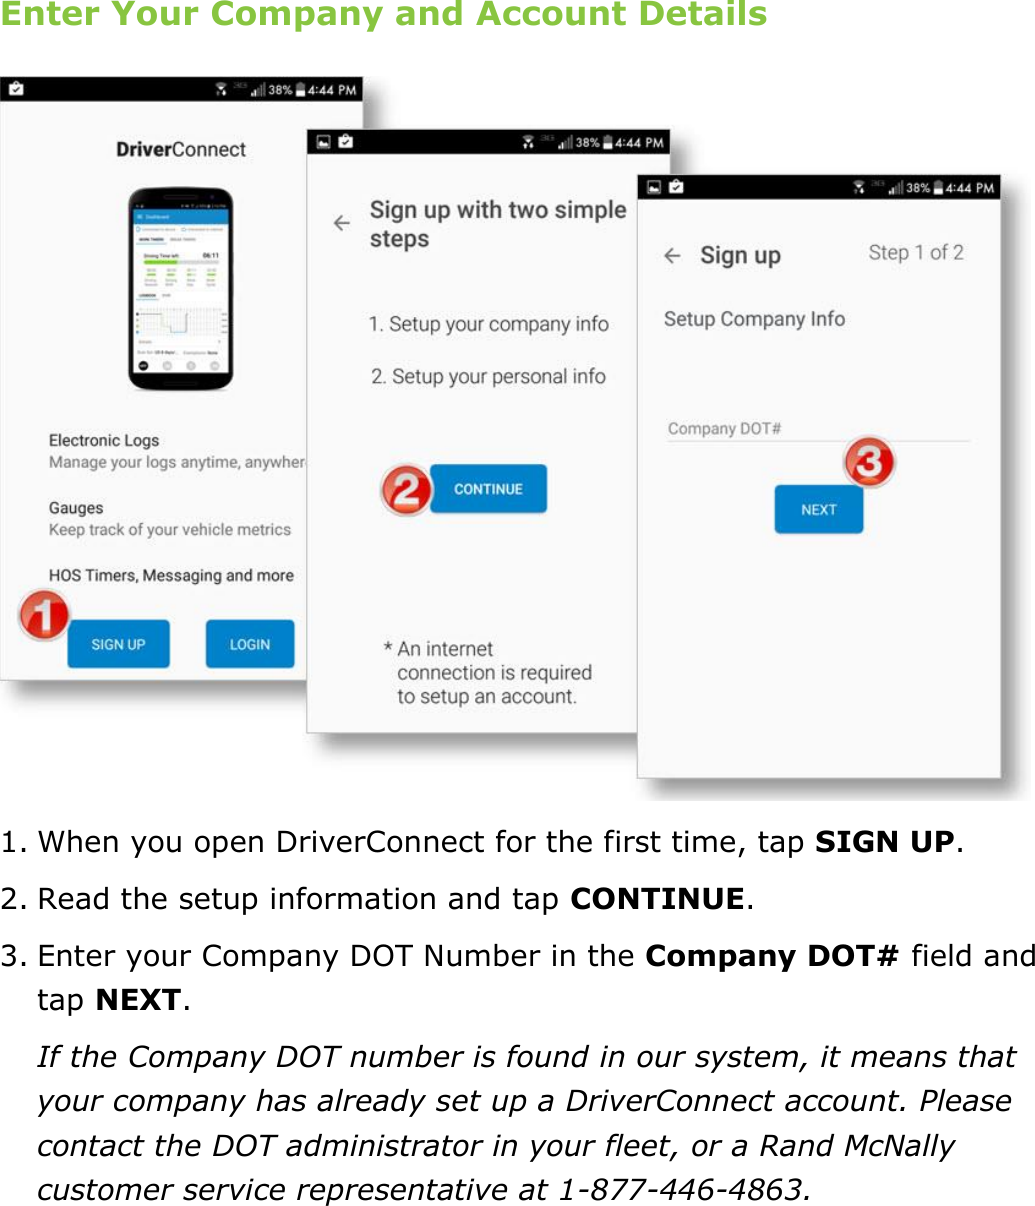 Set My Duty Status DriverConnect User Guide  8 © 2016-2017, Rand McNally, Inc. Enter Your Company and Account Details  1. When you open DriverConnect for the first time, tap SIGN UP.  2. Read the setup information and tap CONTINUE. 3. Enter your Company DOT Number in the Company DOT# field and tap NEXT. If the Company DOT number is found in our system, it means that your company has already set up a DriverConnect account. Please contact the DOT administrator in your fleet, or a Rand McNally customer service representative at 1-877-446-4863.    